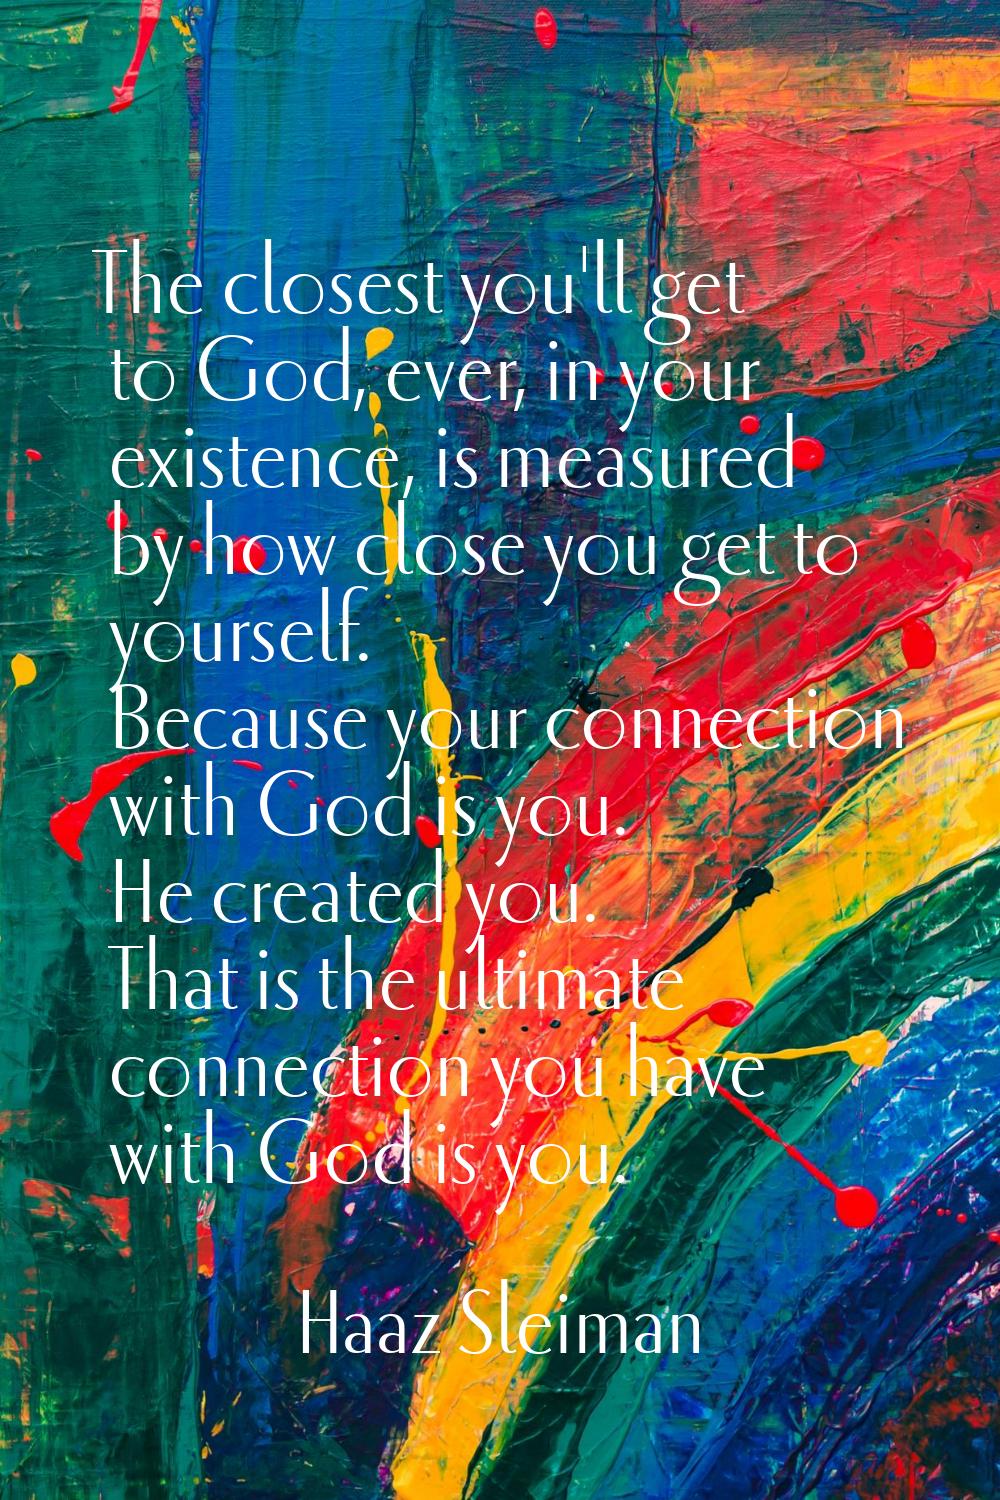 The closest you'll get to God, ever, in your existence, is measured by how close you get to yoursel